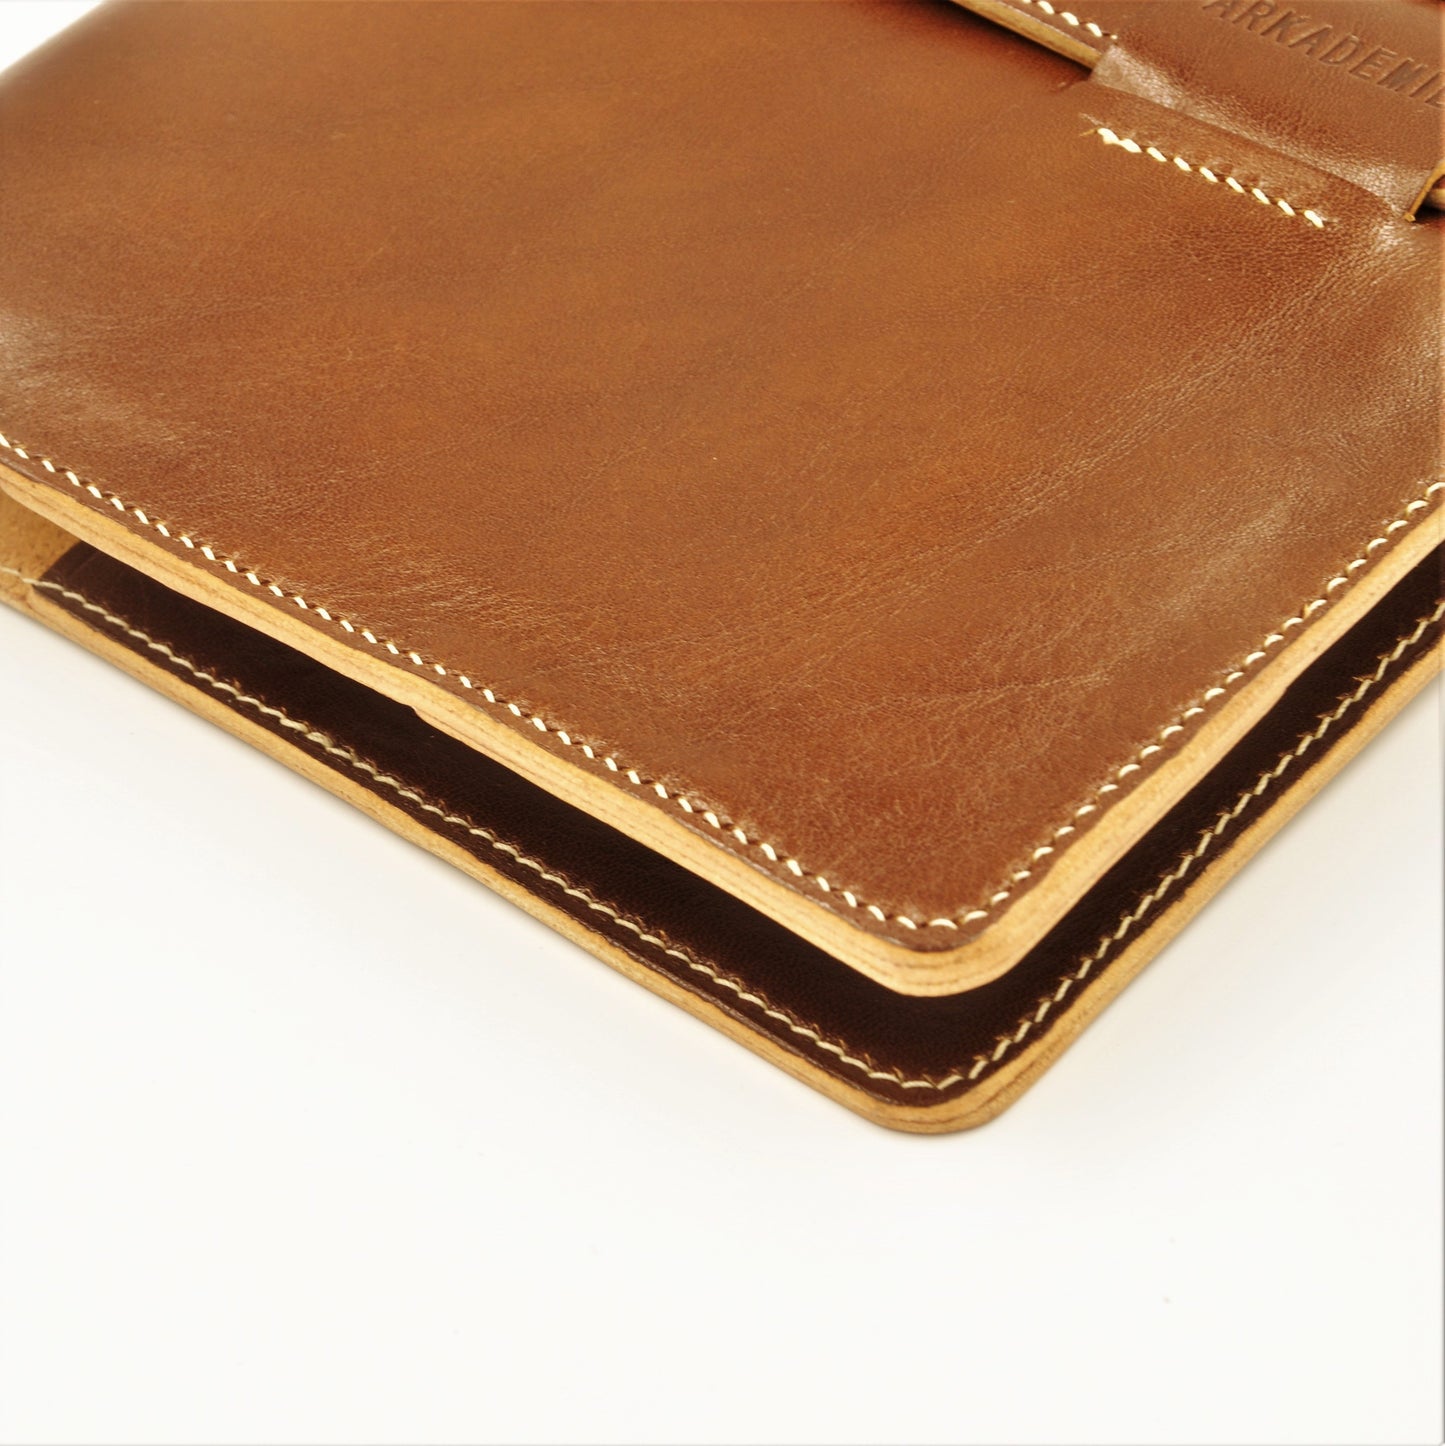 HERITAGE A5-P Bespoke Leather Notebook Case